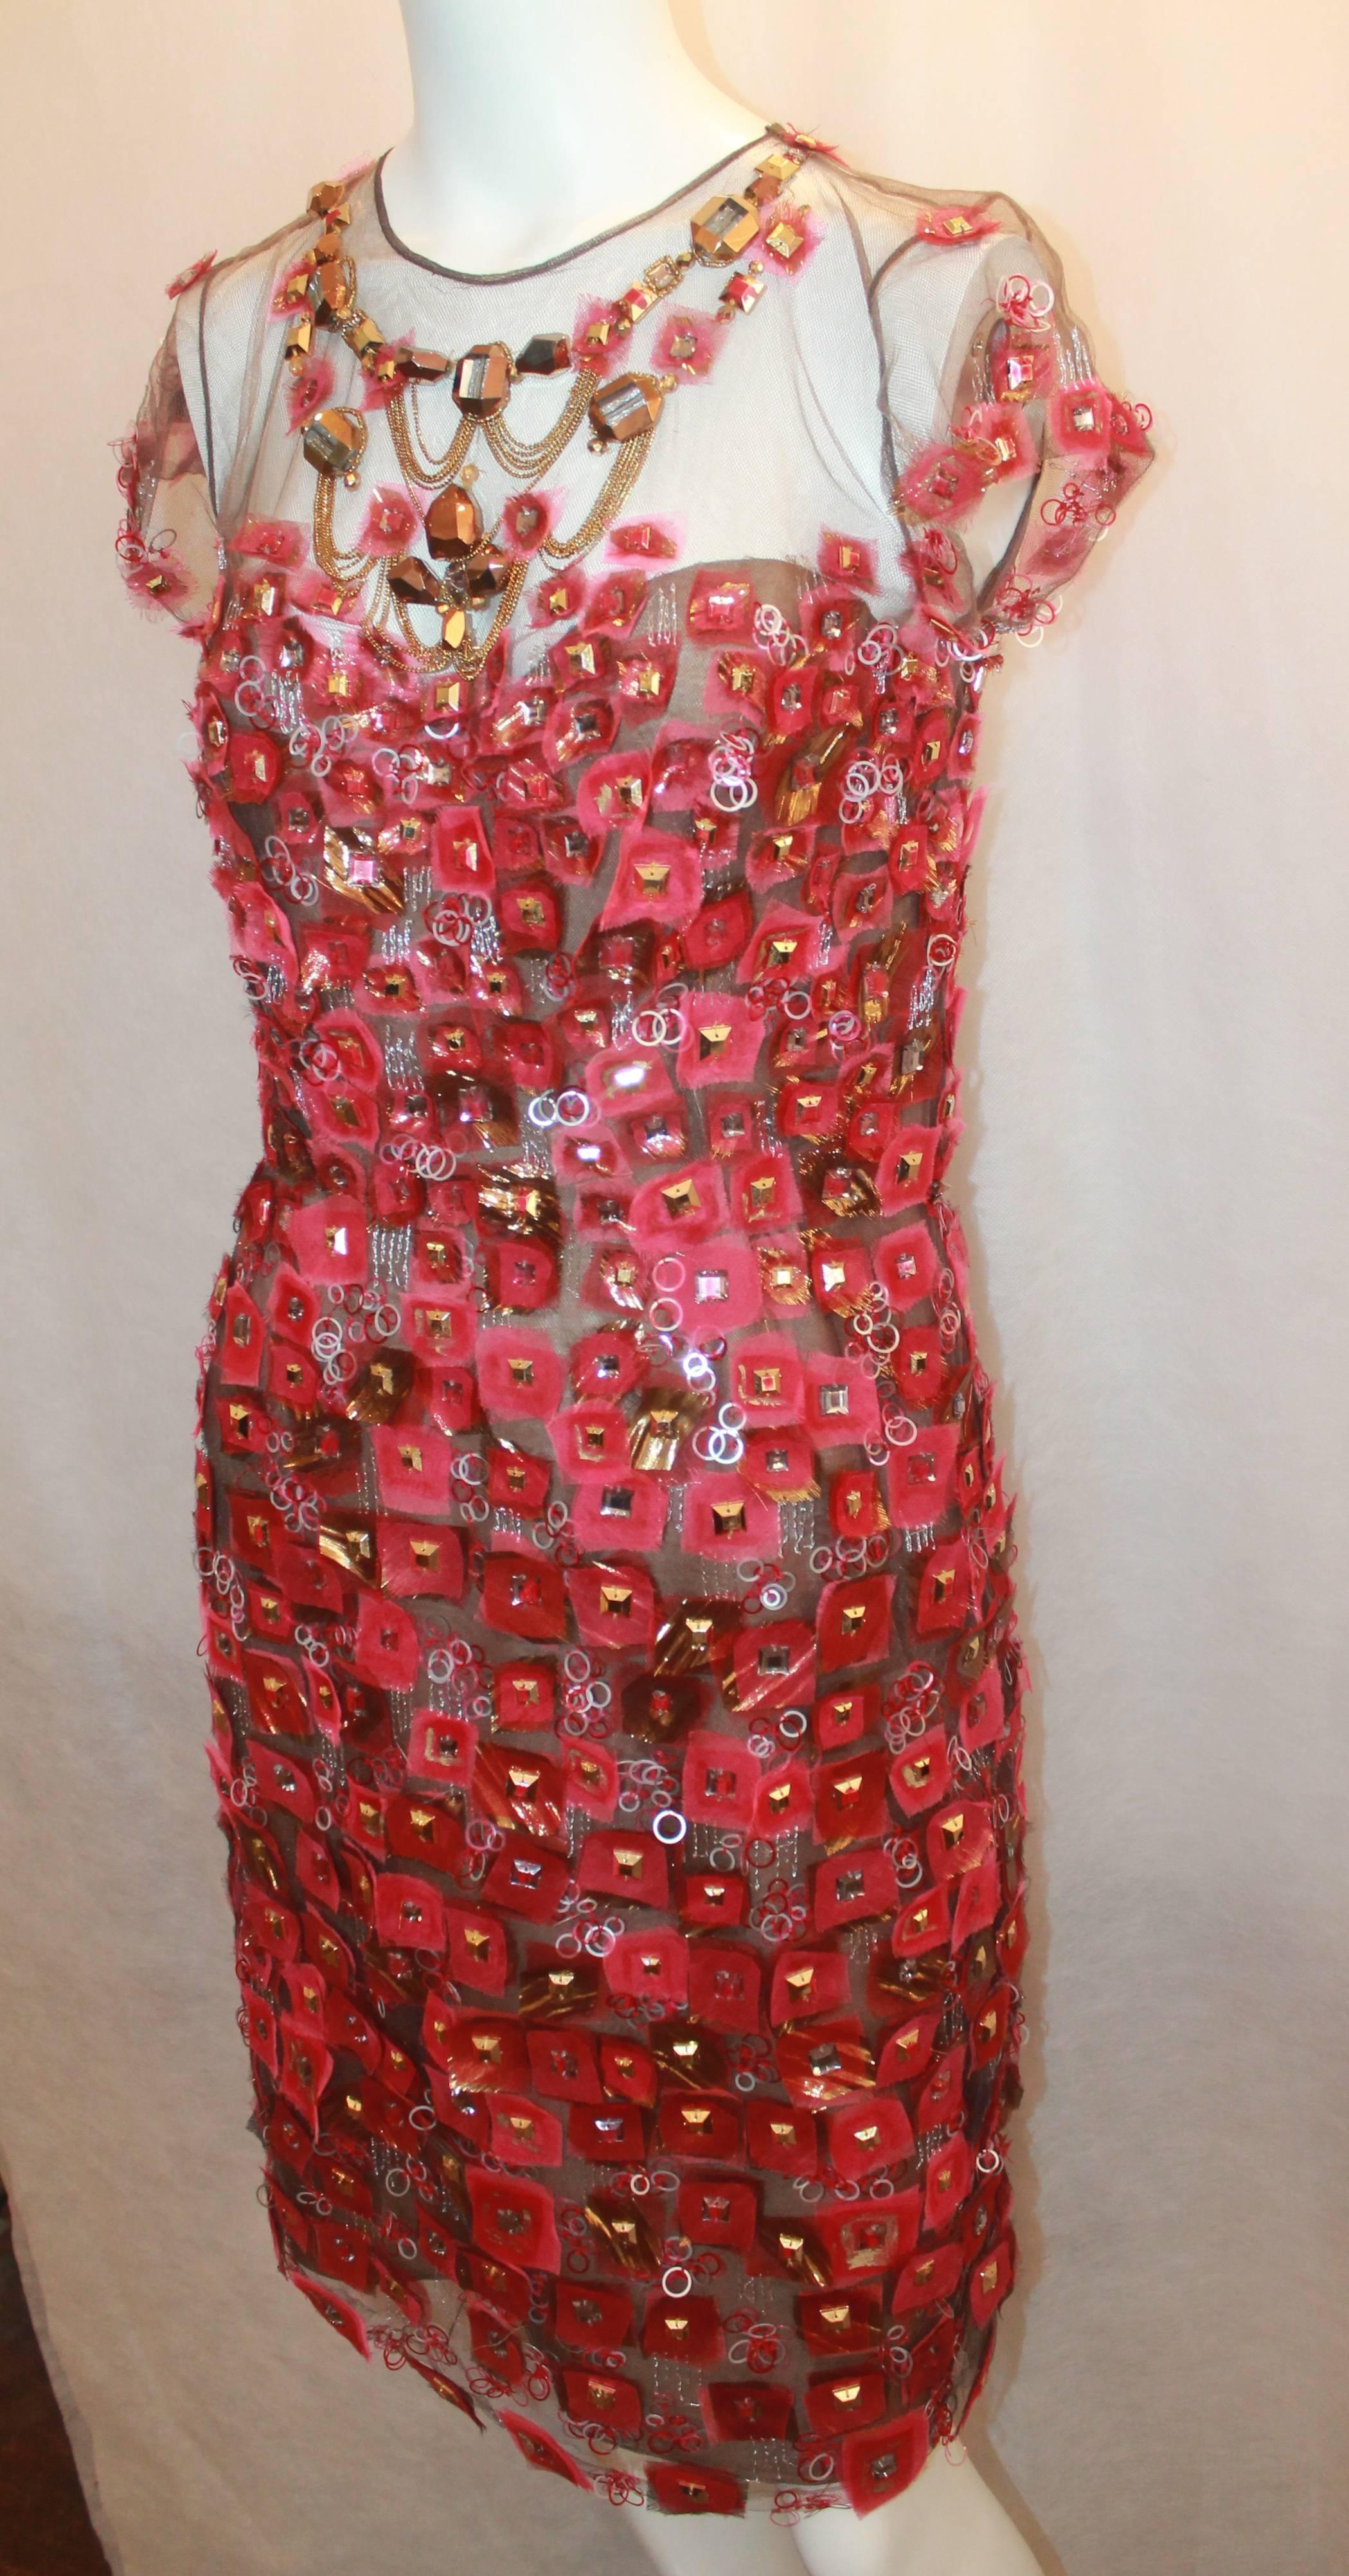 Oscar de la Renta Red, Brown, & Pink Tulle, Mesh, & Applique Short Sleeve Dress - 8.  This gorgeous dress is in excellent condition.  It features circular silver and red sequins, gold, silver, and red square stones, silver stitched detail, and a